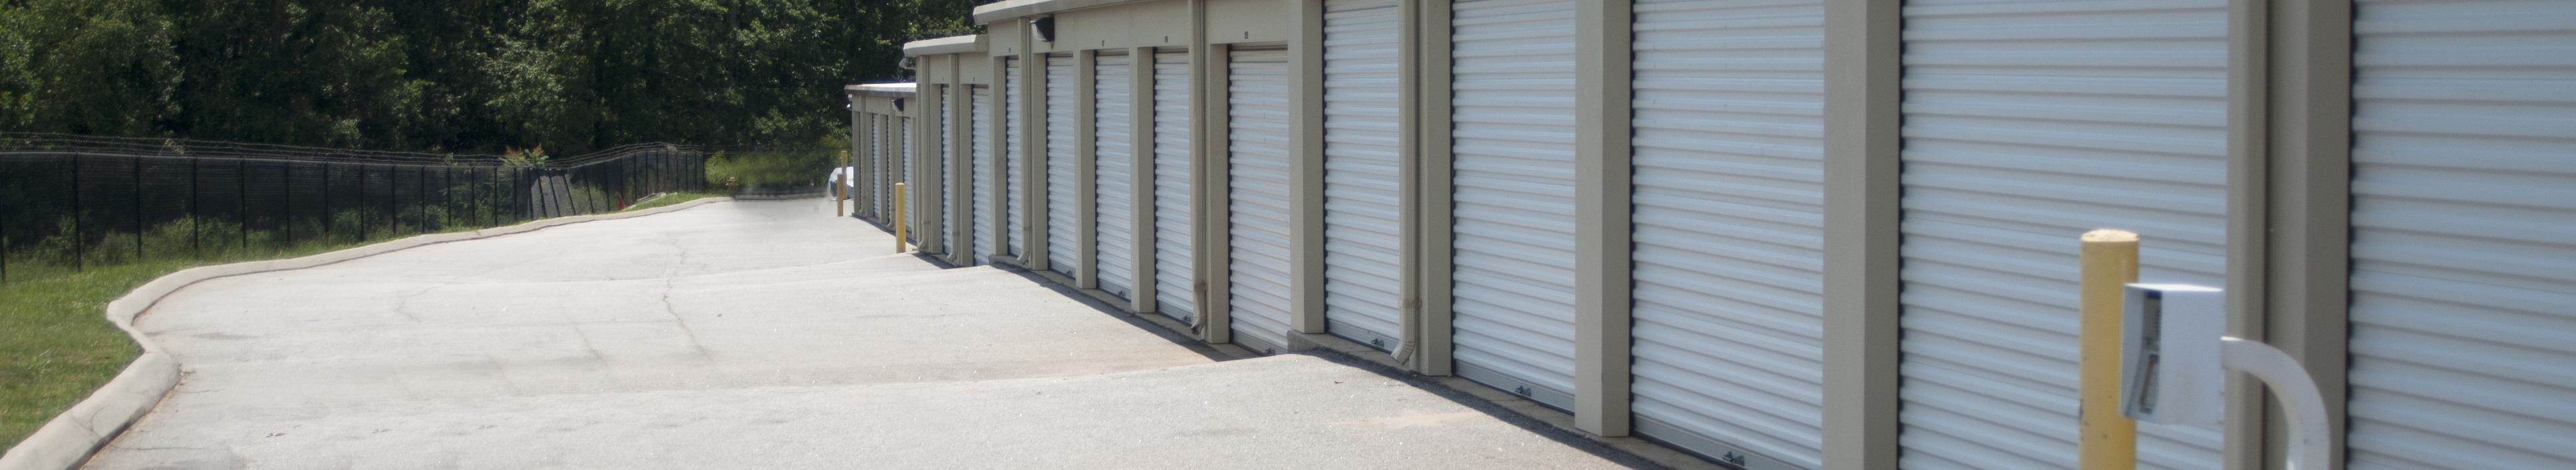 Outside view of storage units with roll up doors at The Storage Vault Greer, South Carolina